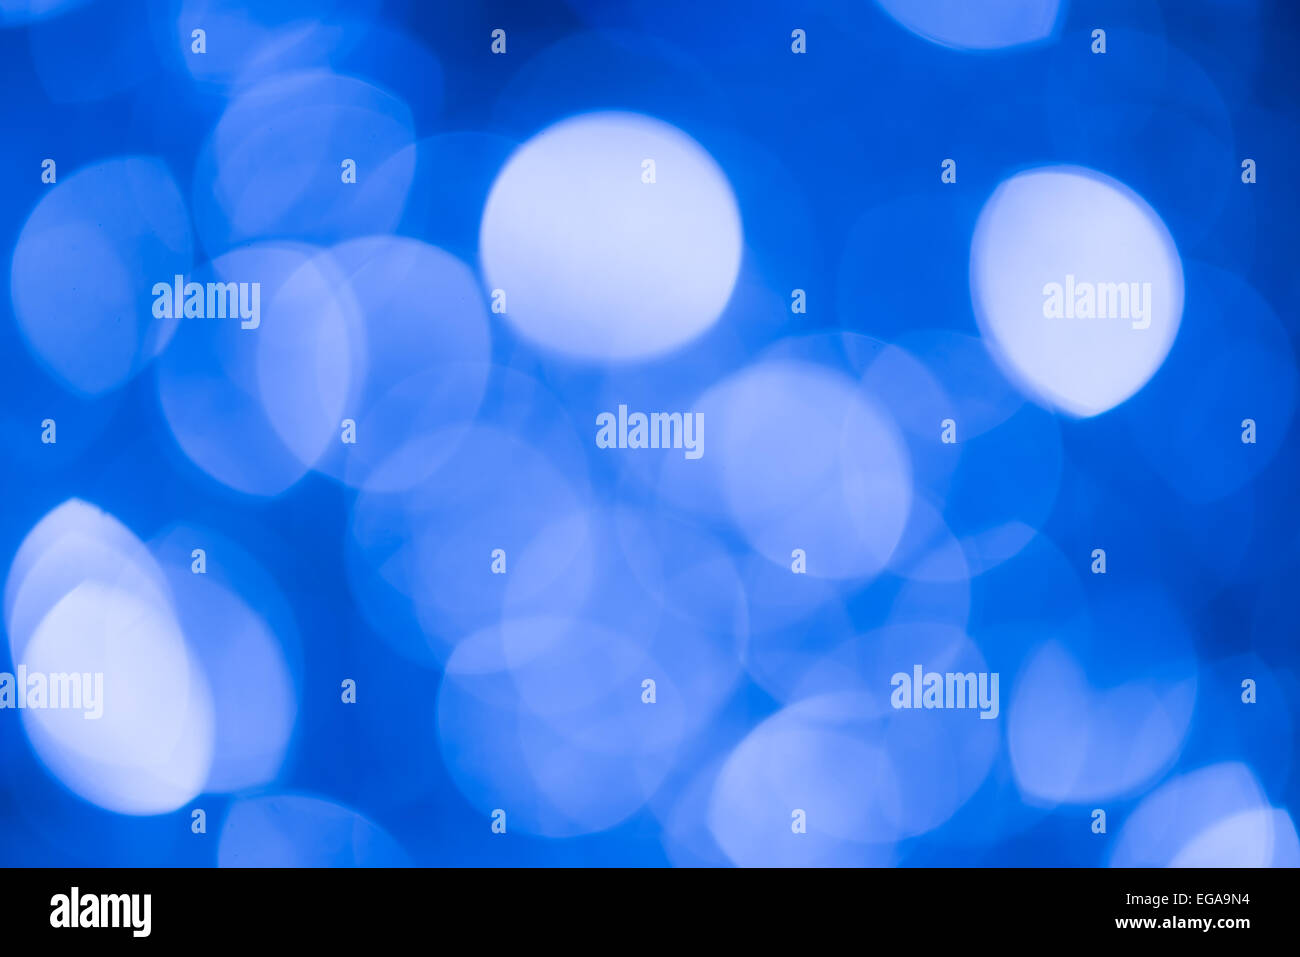 Blue Abstract and blurred Christmas lights Stock Photo